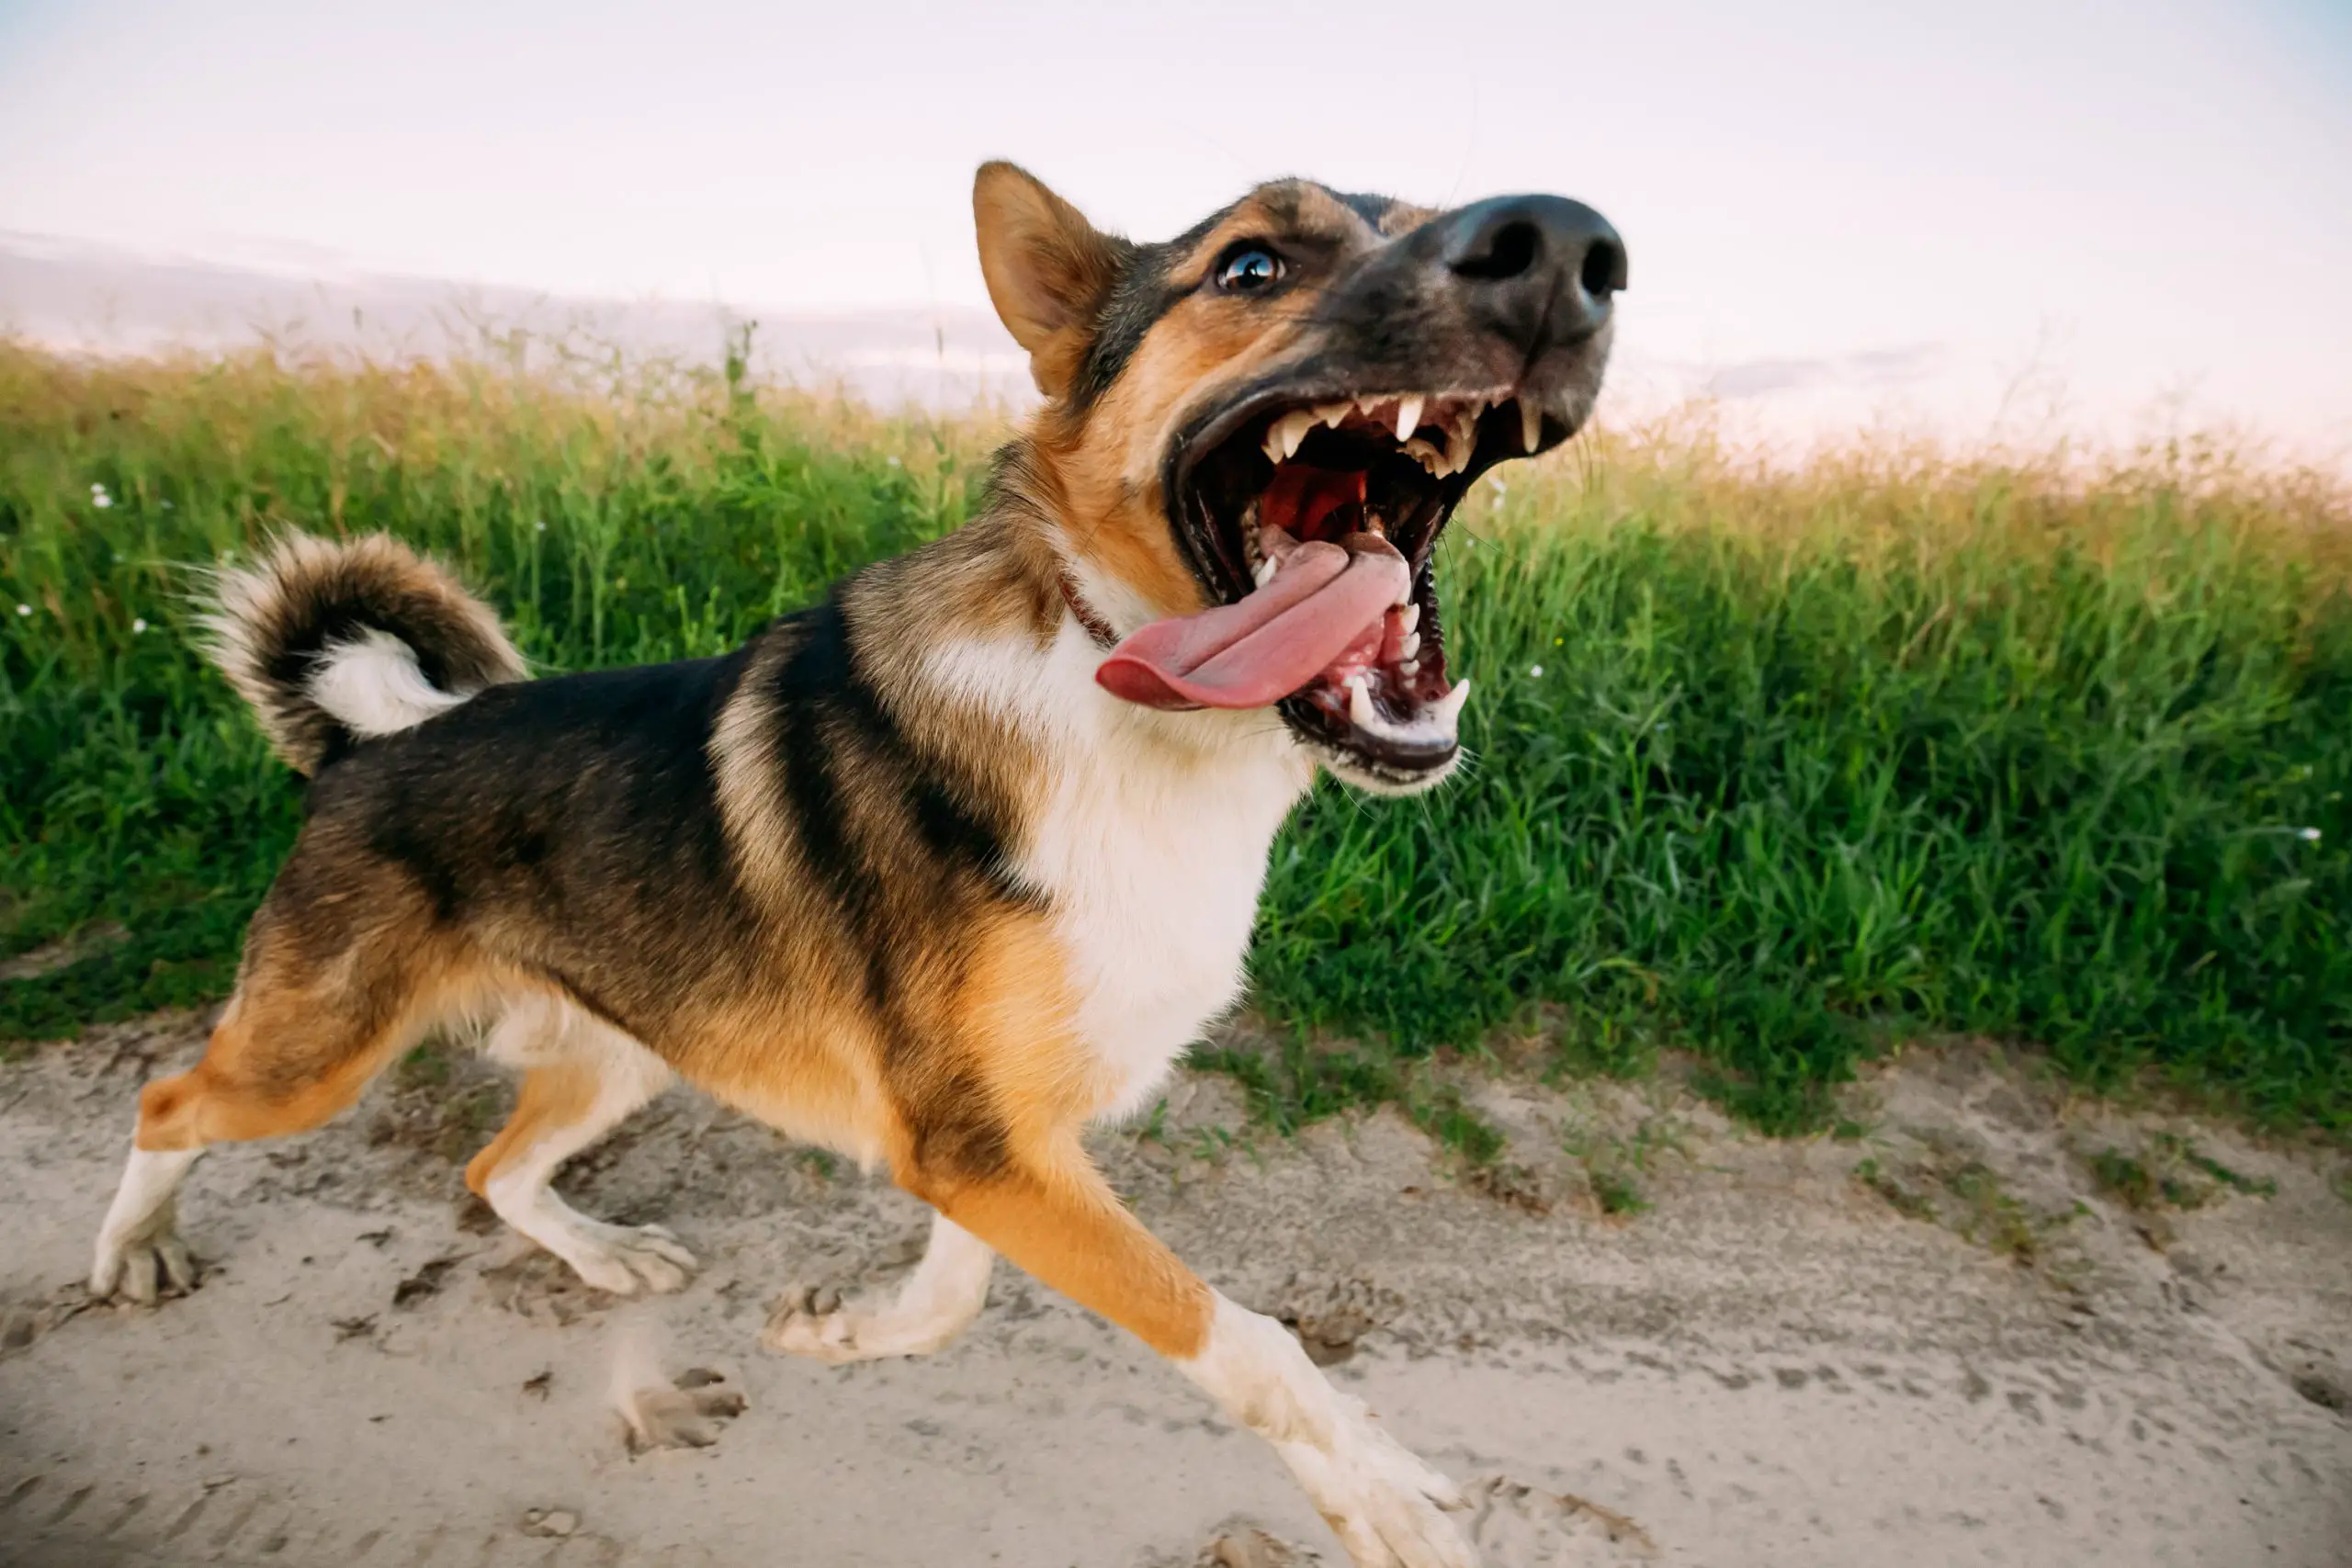 Tactics You Should Know For Training Aggressive Dogs